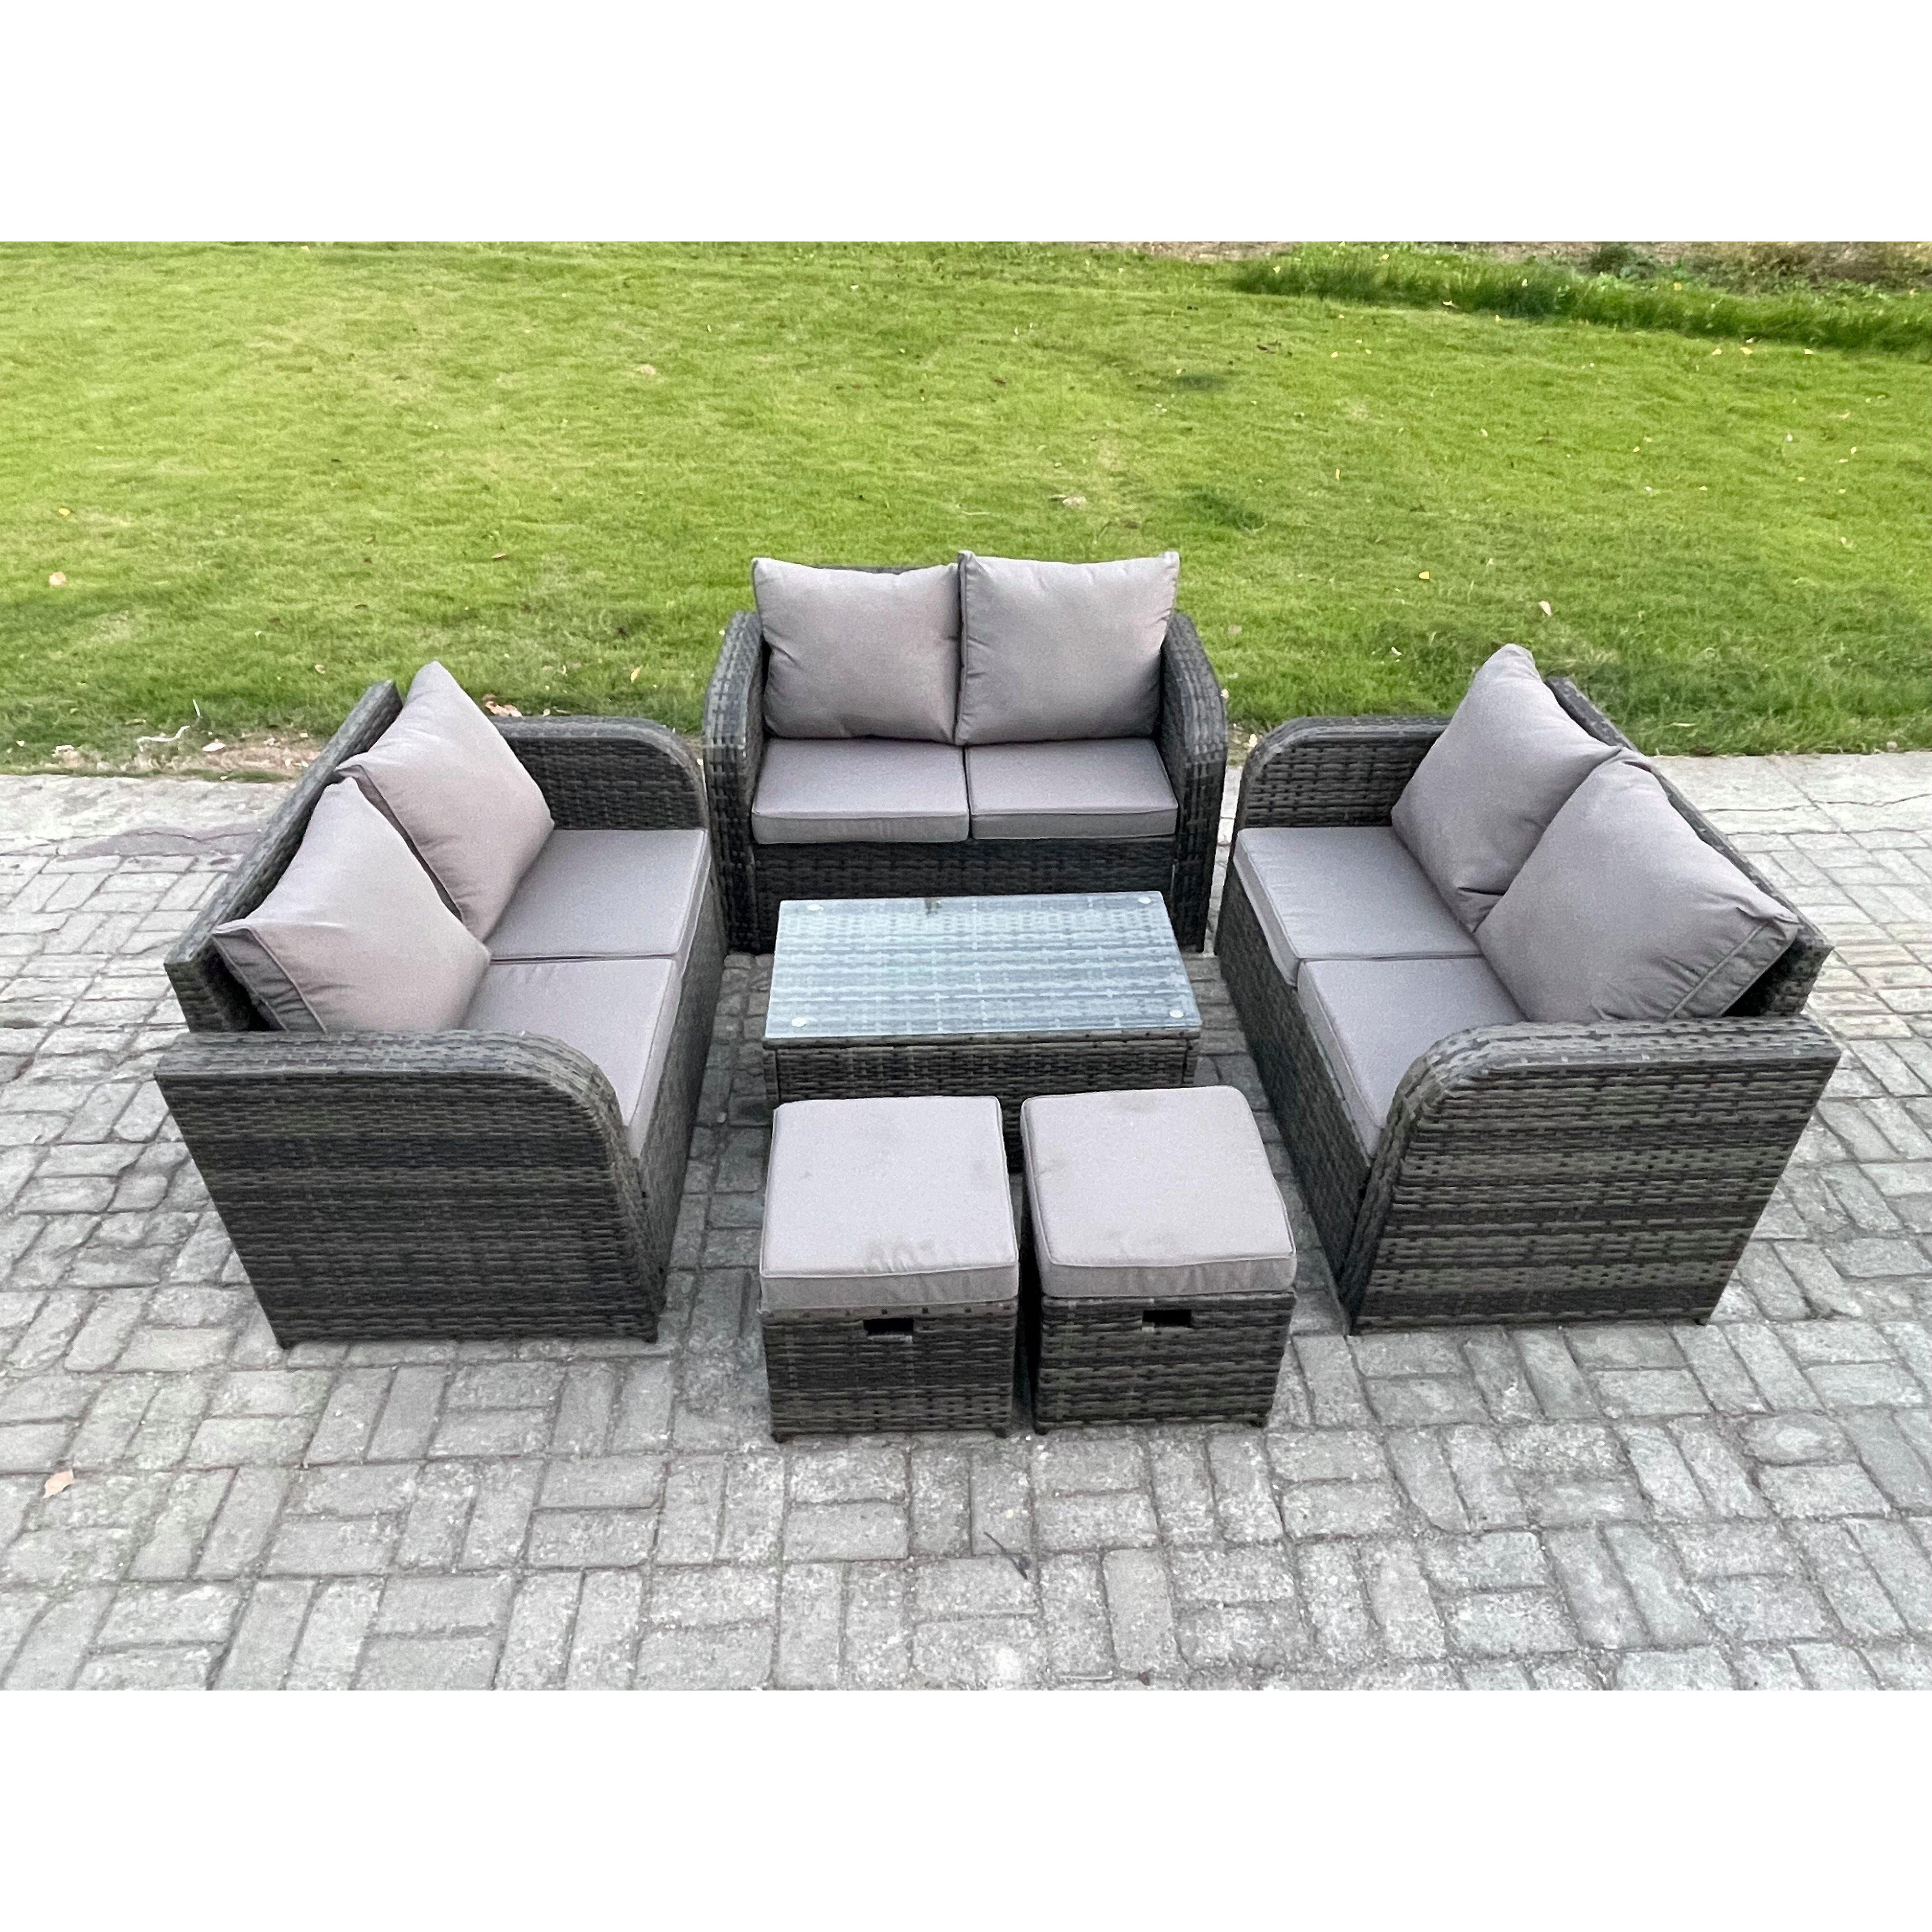 Outdoor Garden Furniture Sets 8 Seater Wicker Rattan Furniture Sofa Sets with Rectangular Coffee Table Love Sofa 2 Small Footstool - image 1